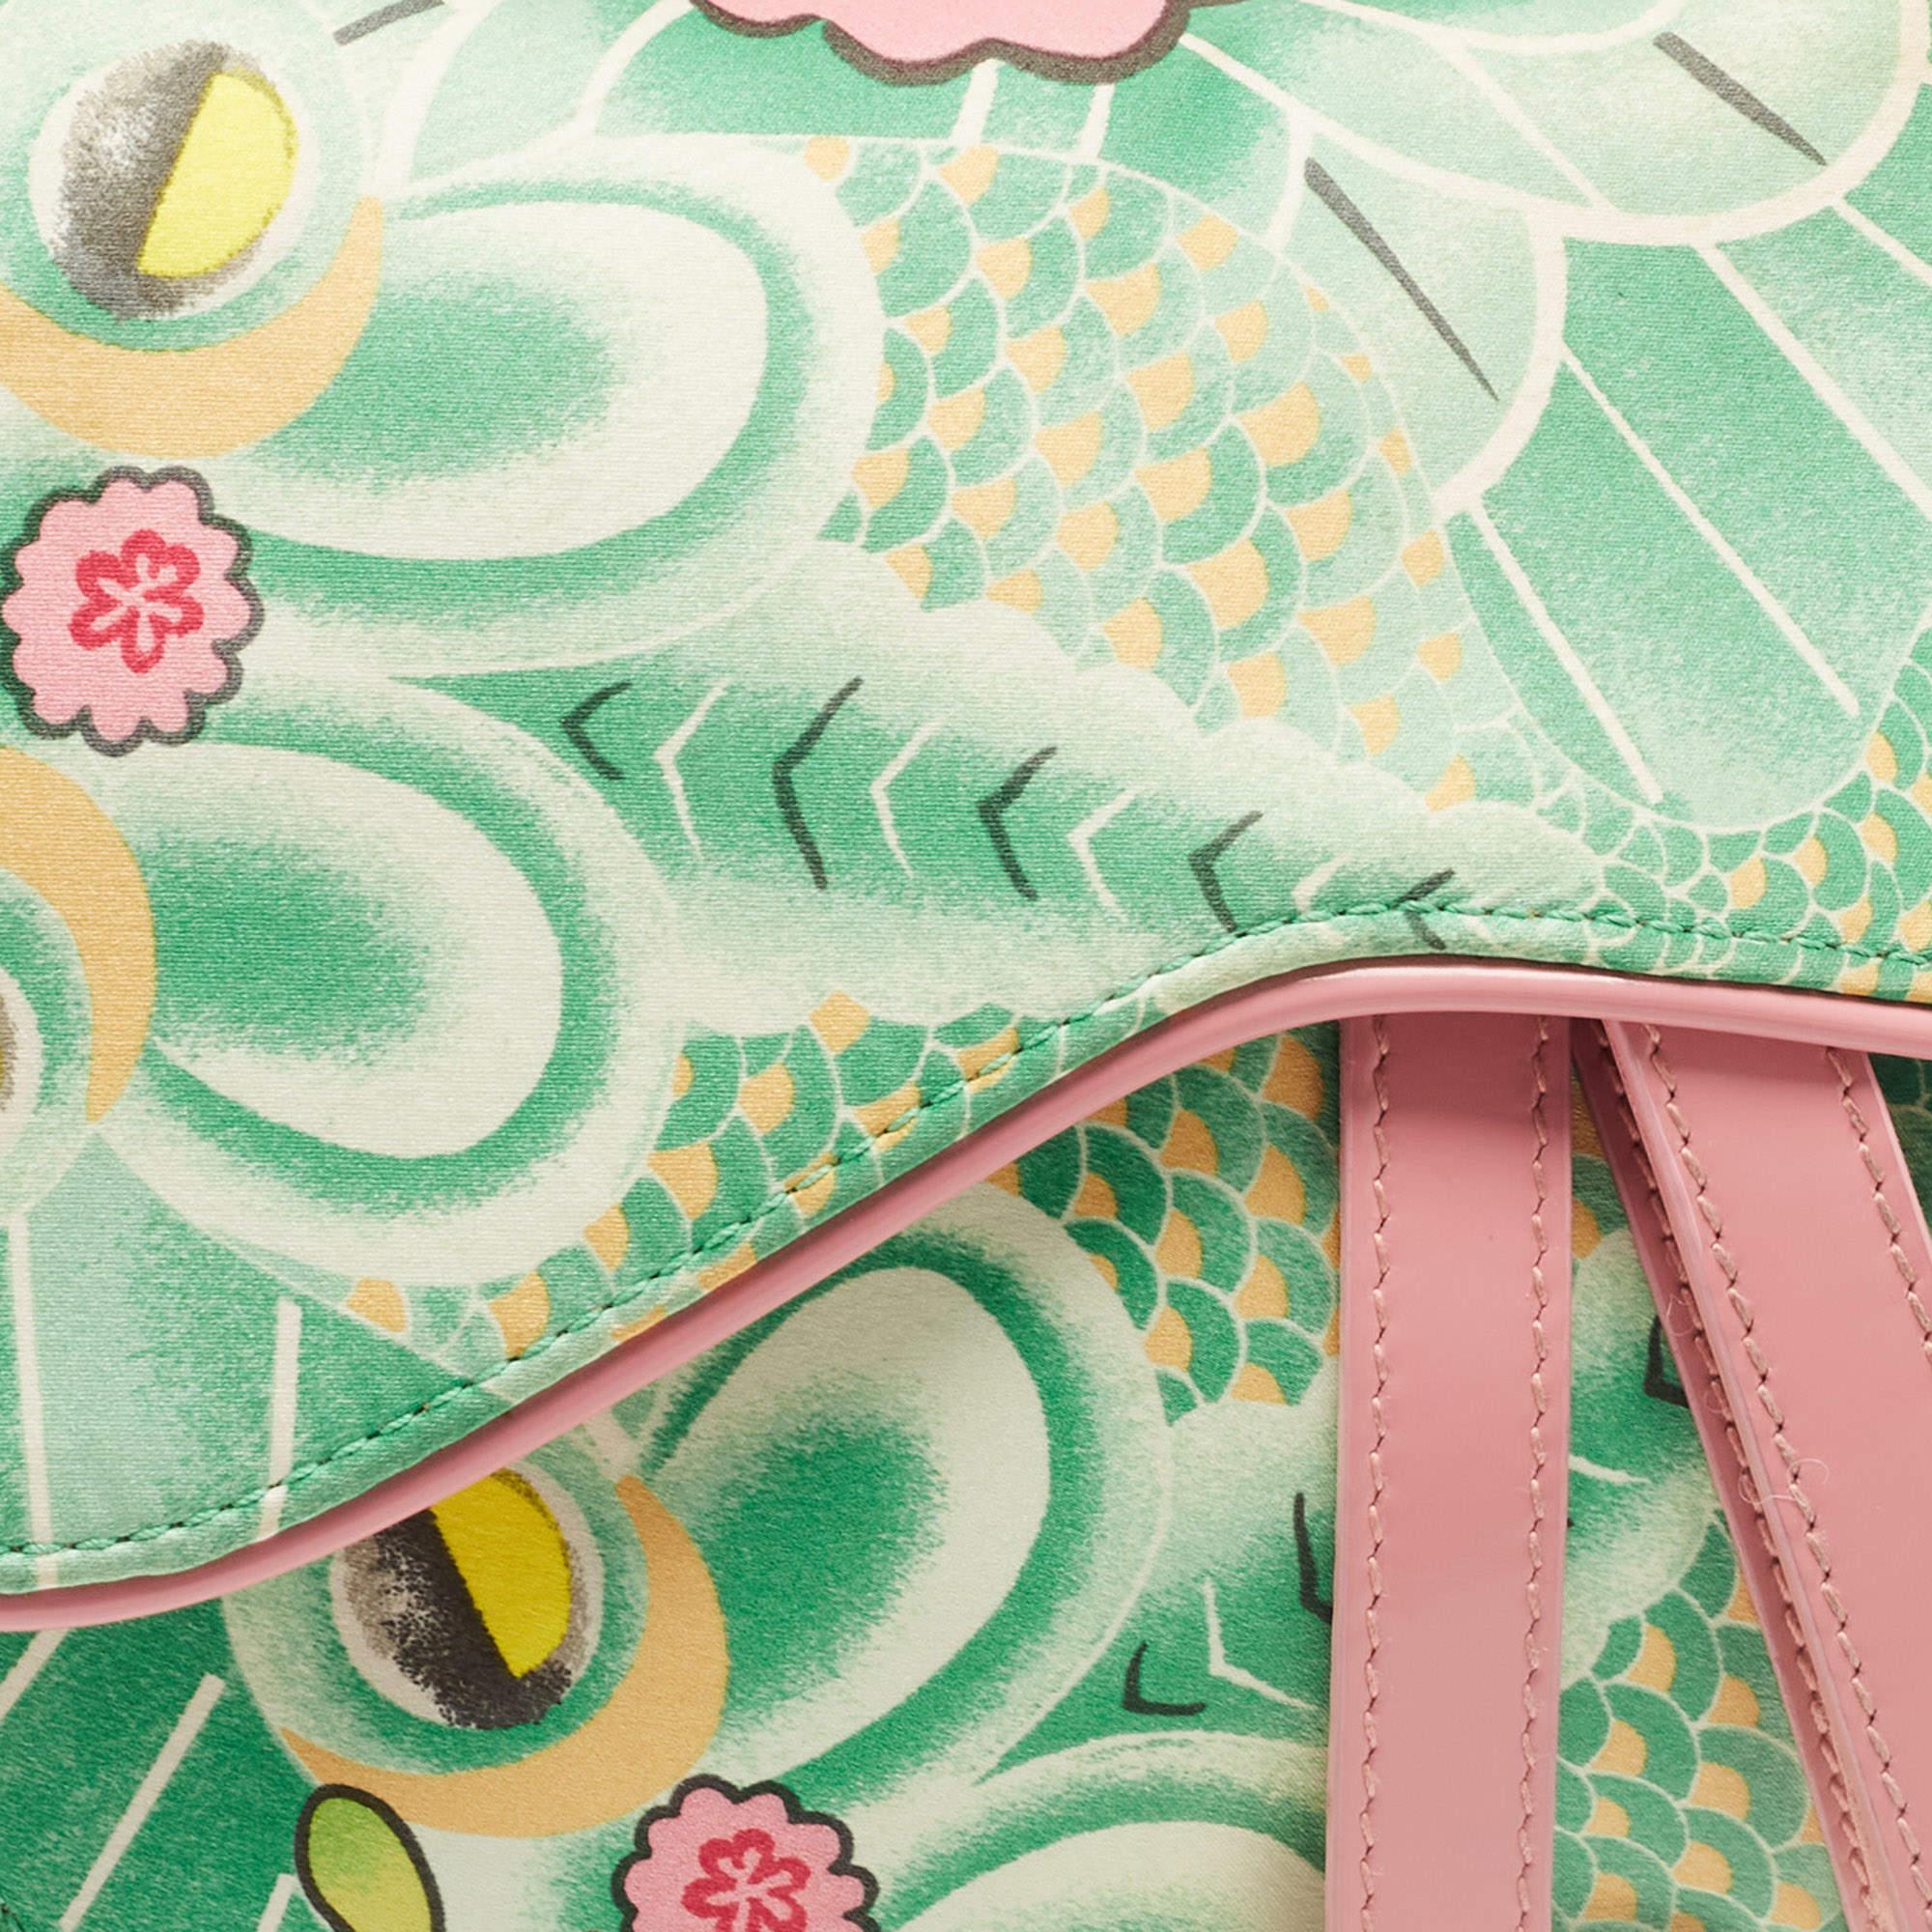 Dior Pink/Green Printed Satin and Glazed Leather Limited Edition 0705 Saddle Bag 7